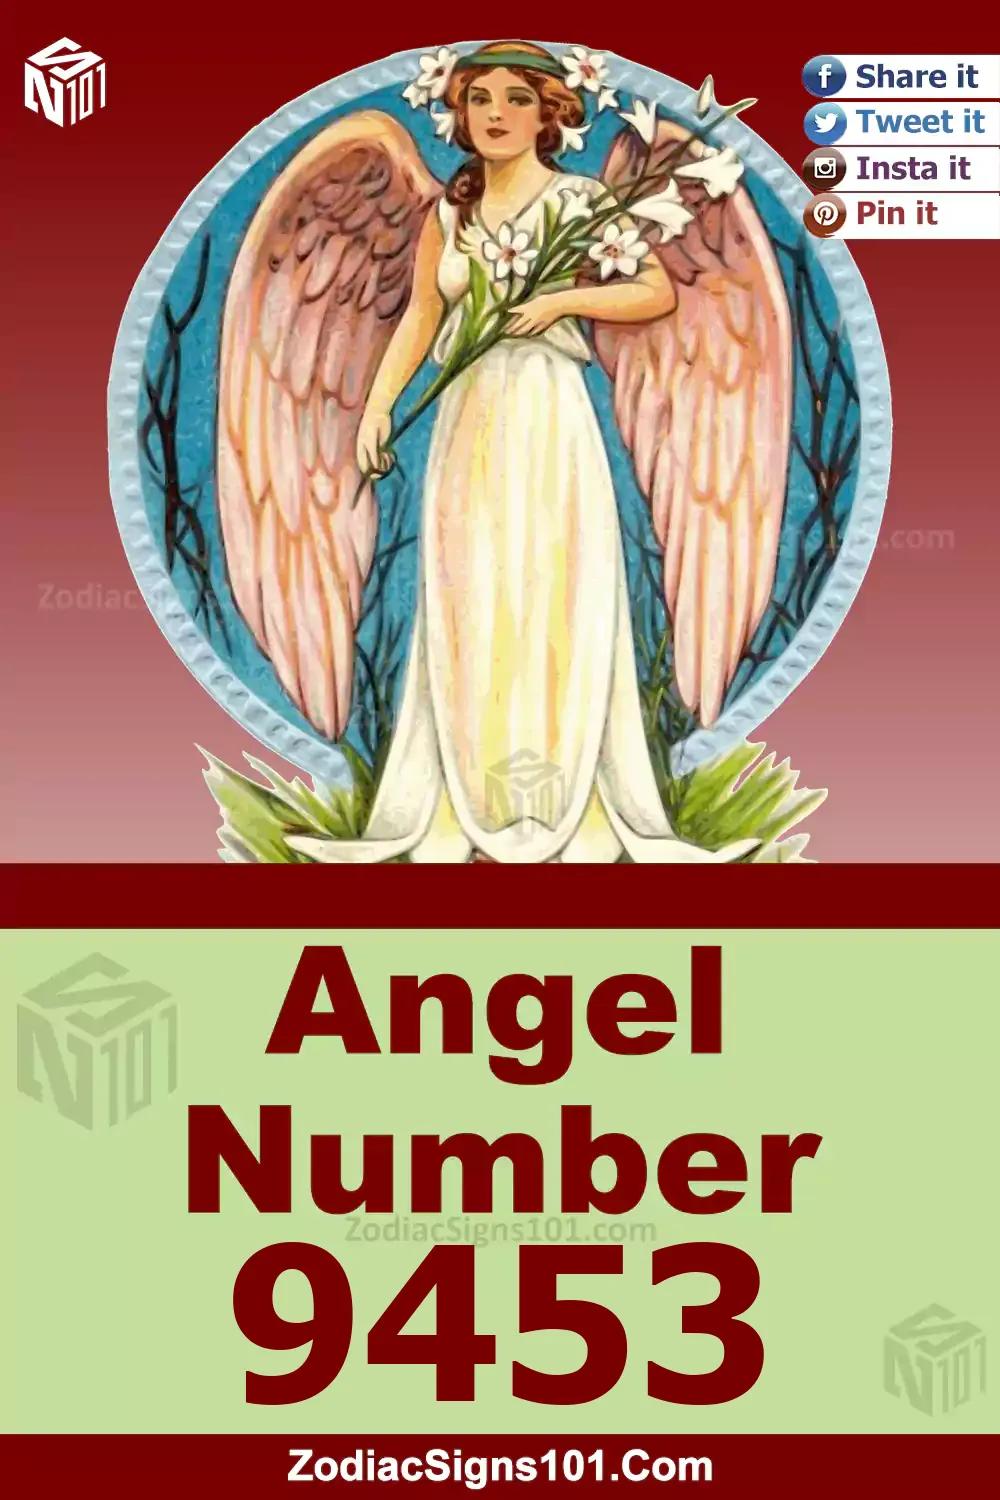 9453 Angel Number Meaning